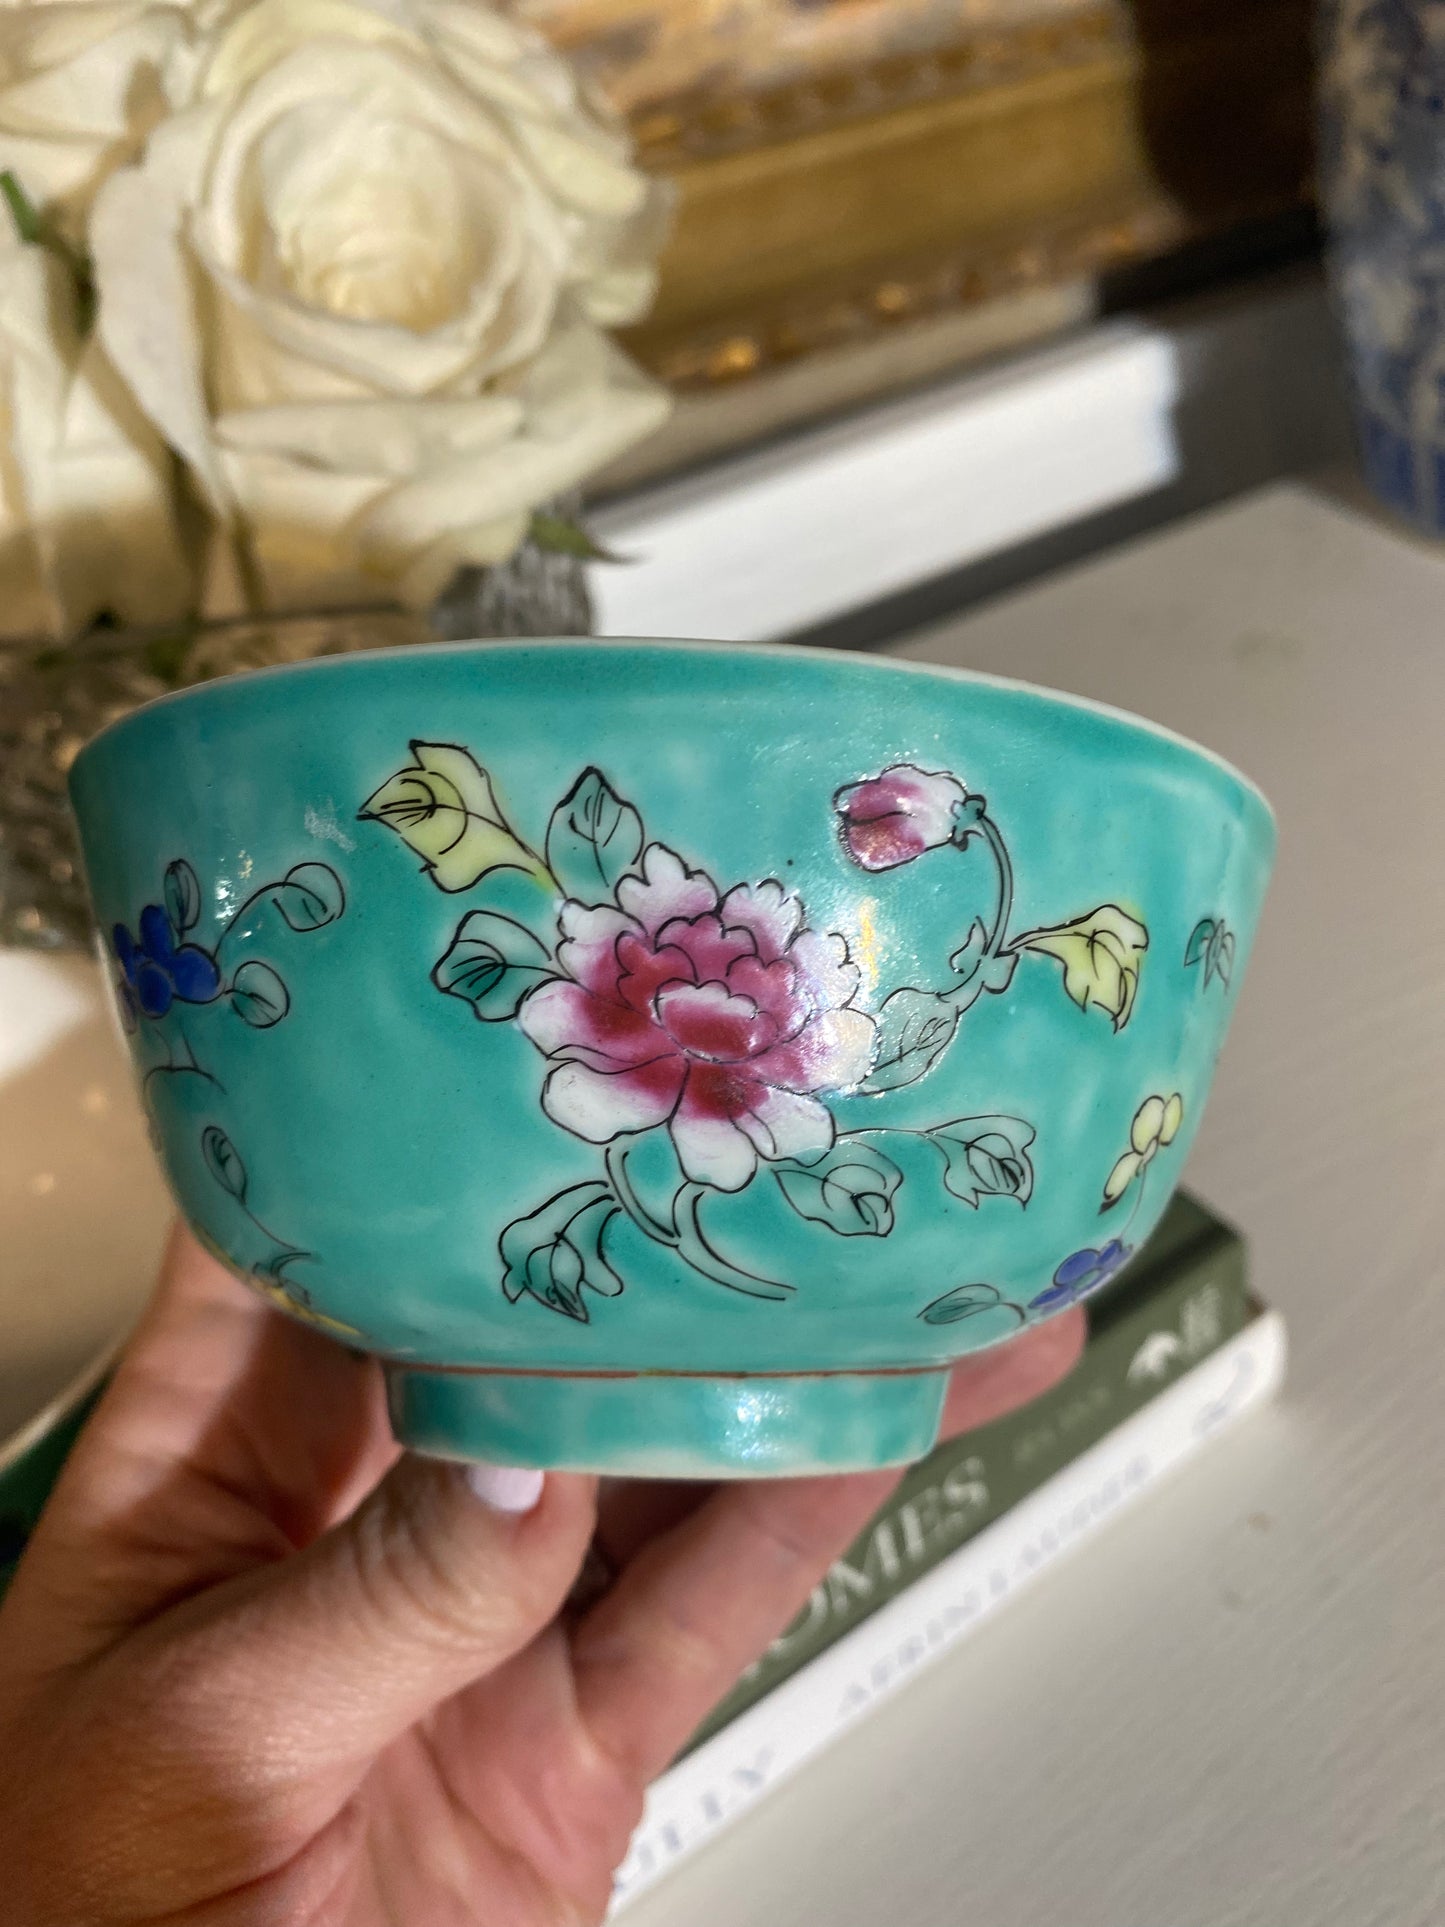 Chinese Antique Porcelain Floral Bowl with Turquoise Enamel - Qianlong or Early Republic Era